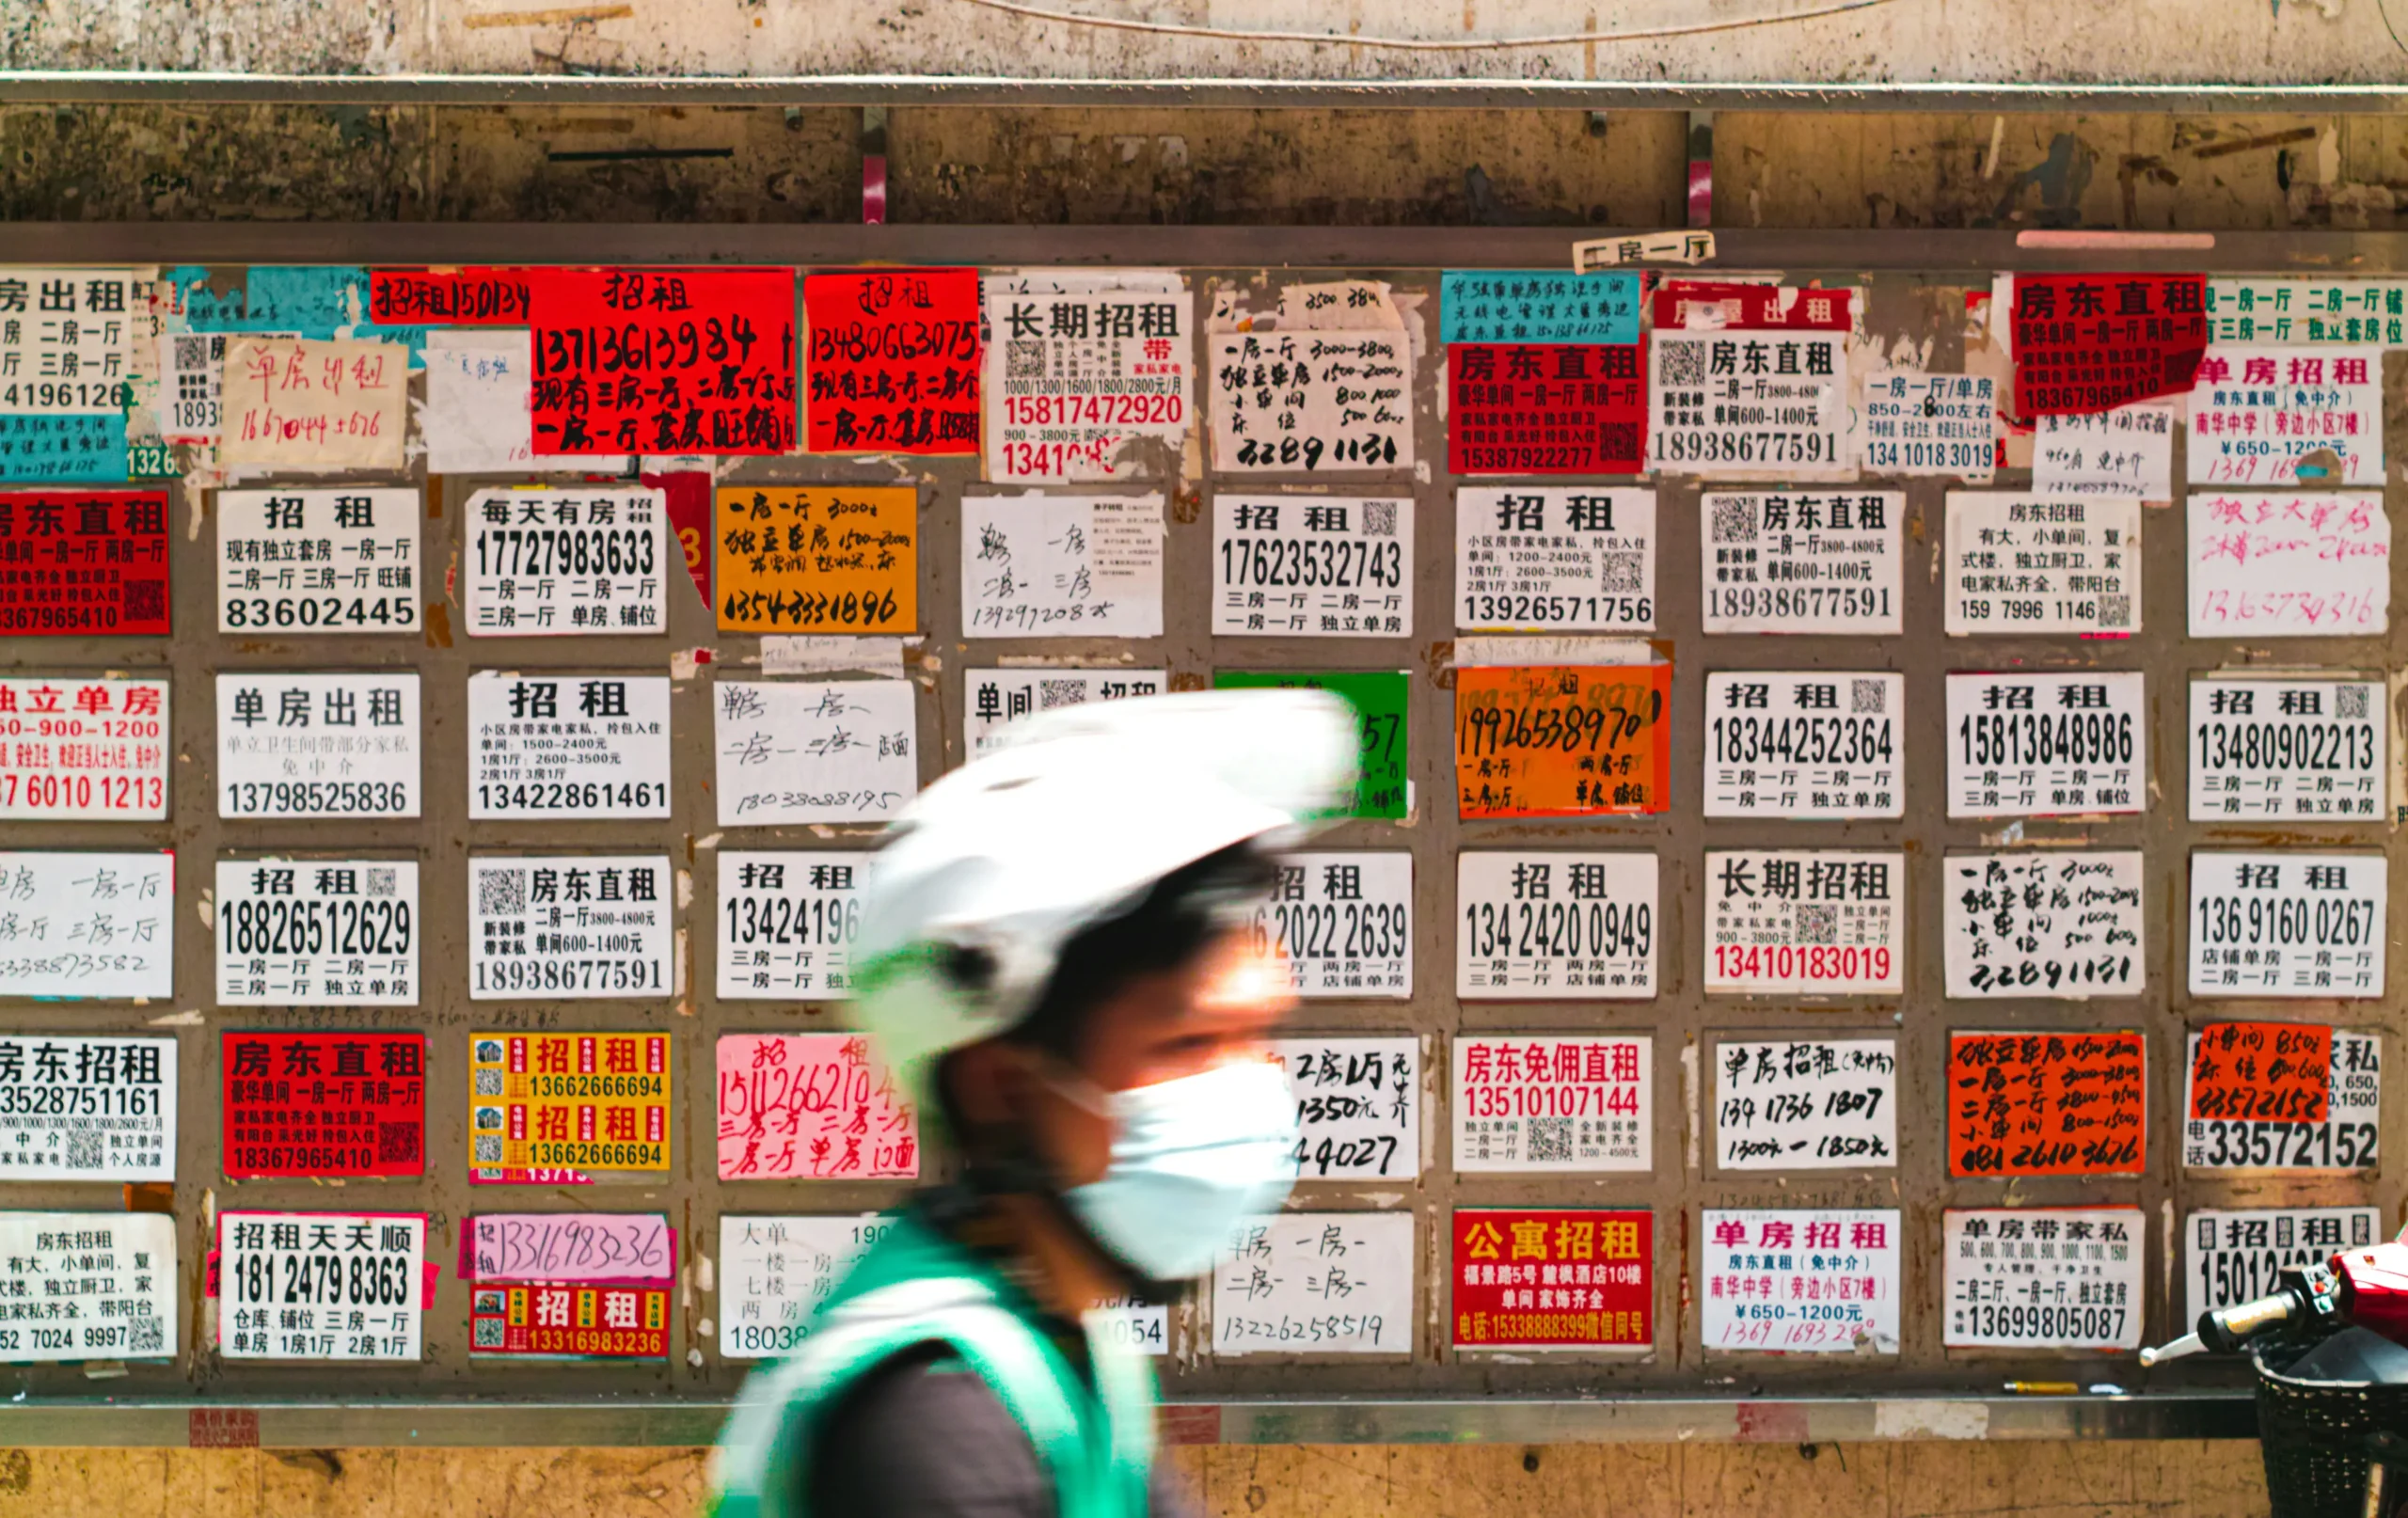 Photo shows a wall of work listings available in Shenzhen, China, April 25, 2021. (Unsplash/Joshua Fernandez)